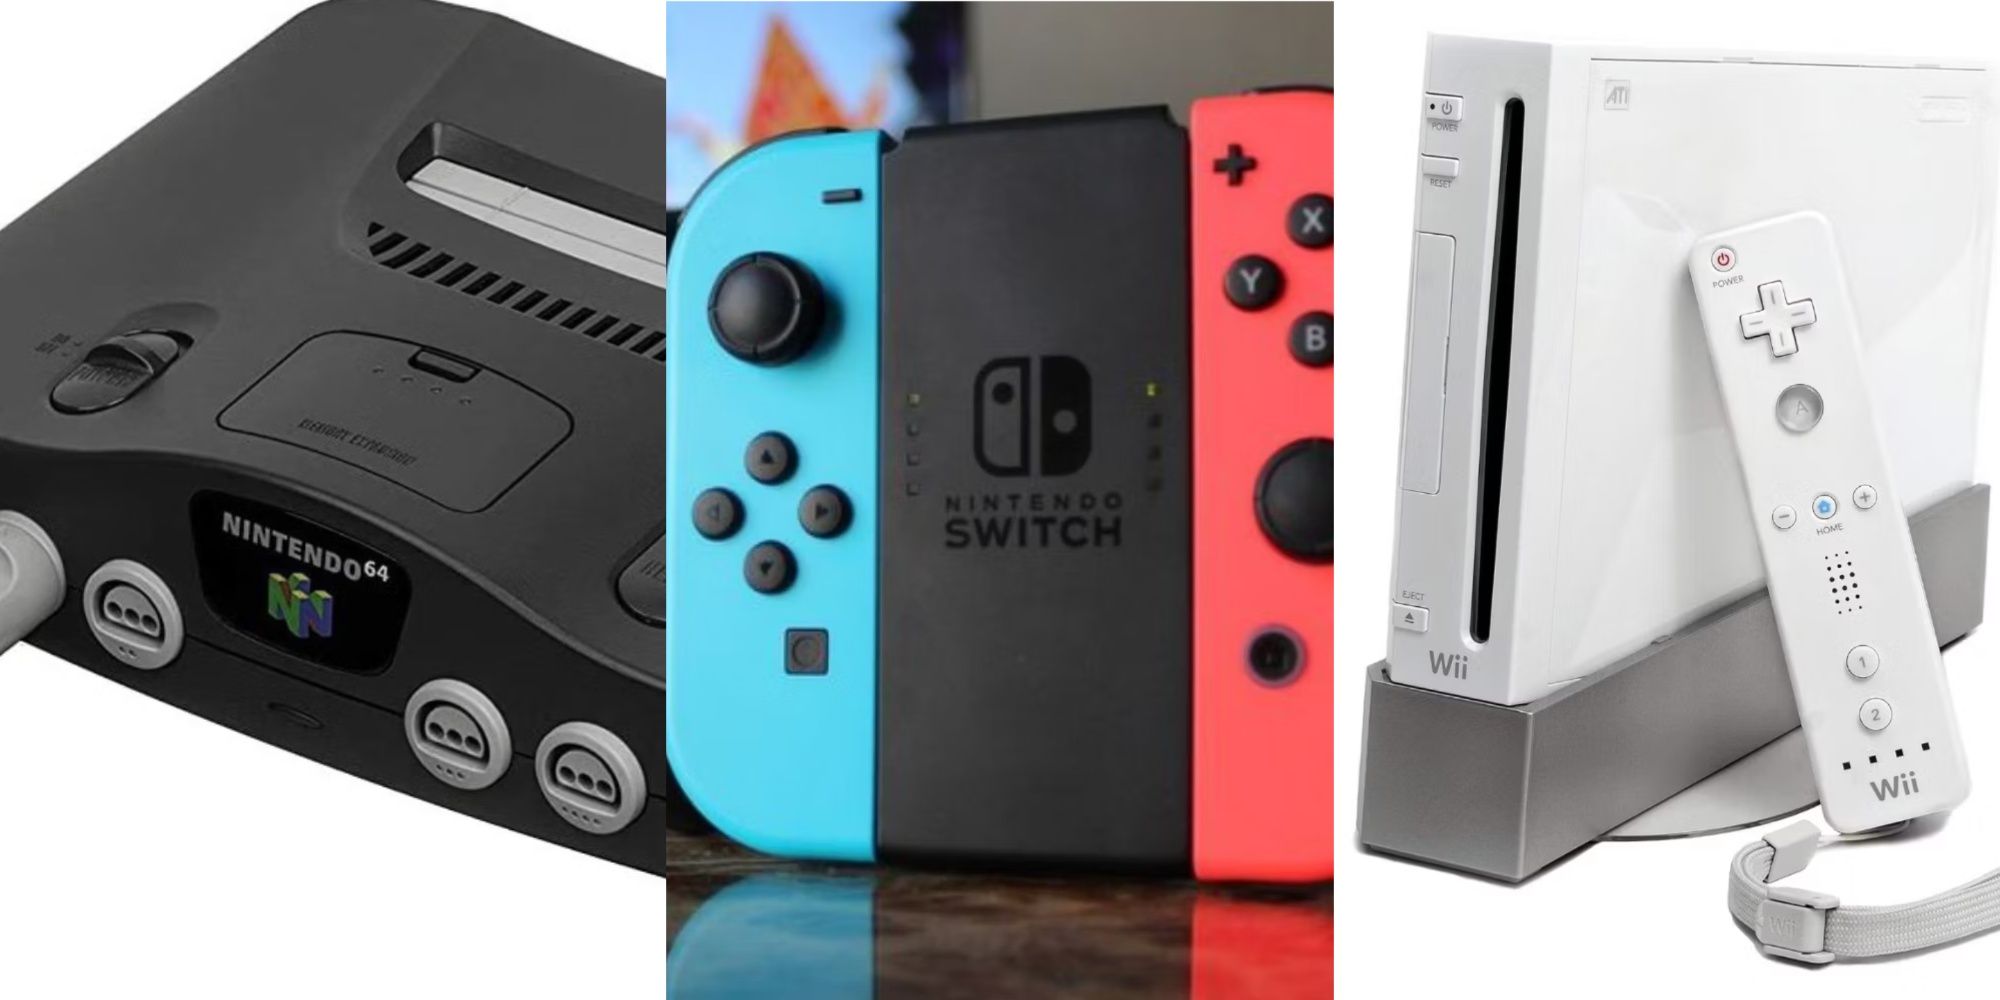 A Nintendo 64 console, a Wii console, and a Red and Blue Joy-Con from the Nintendo Switch